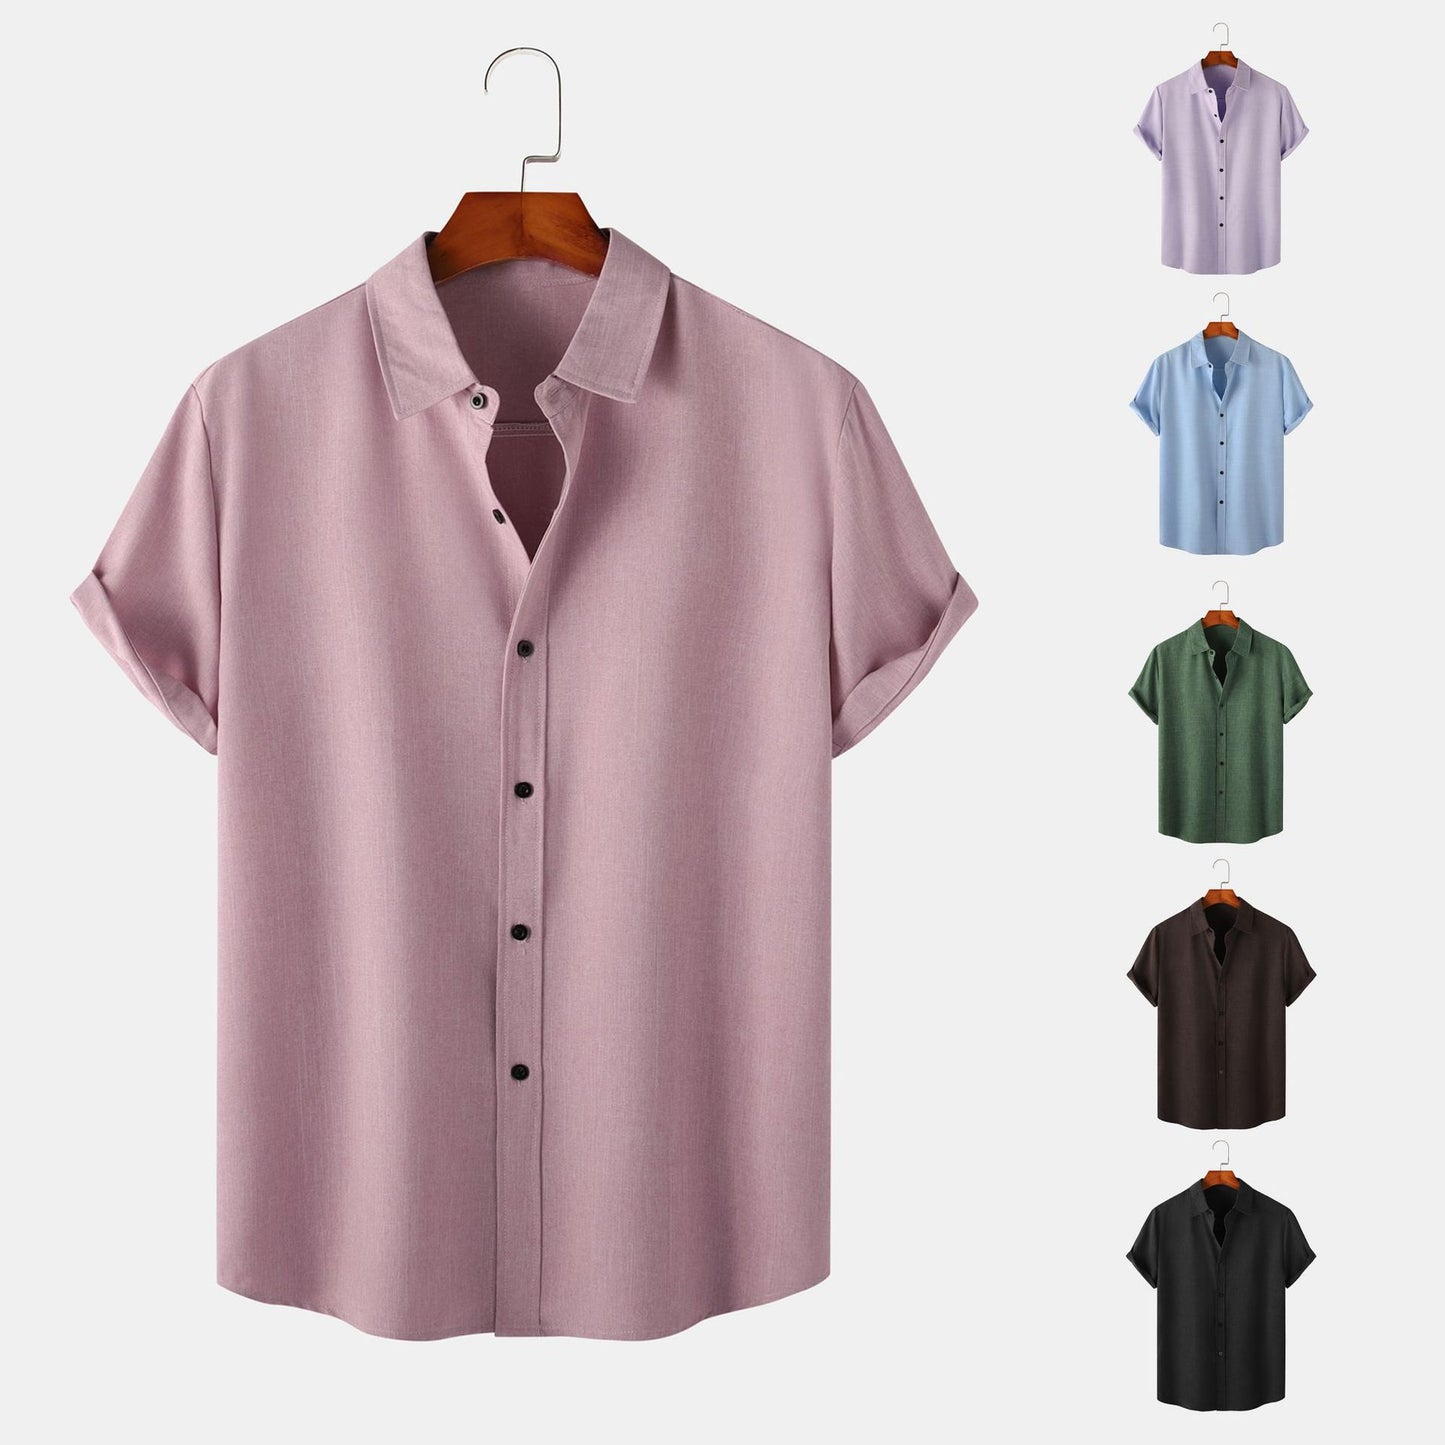 Breasted Casual Elegance Shirt - World Of Journey